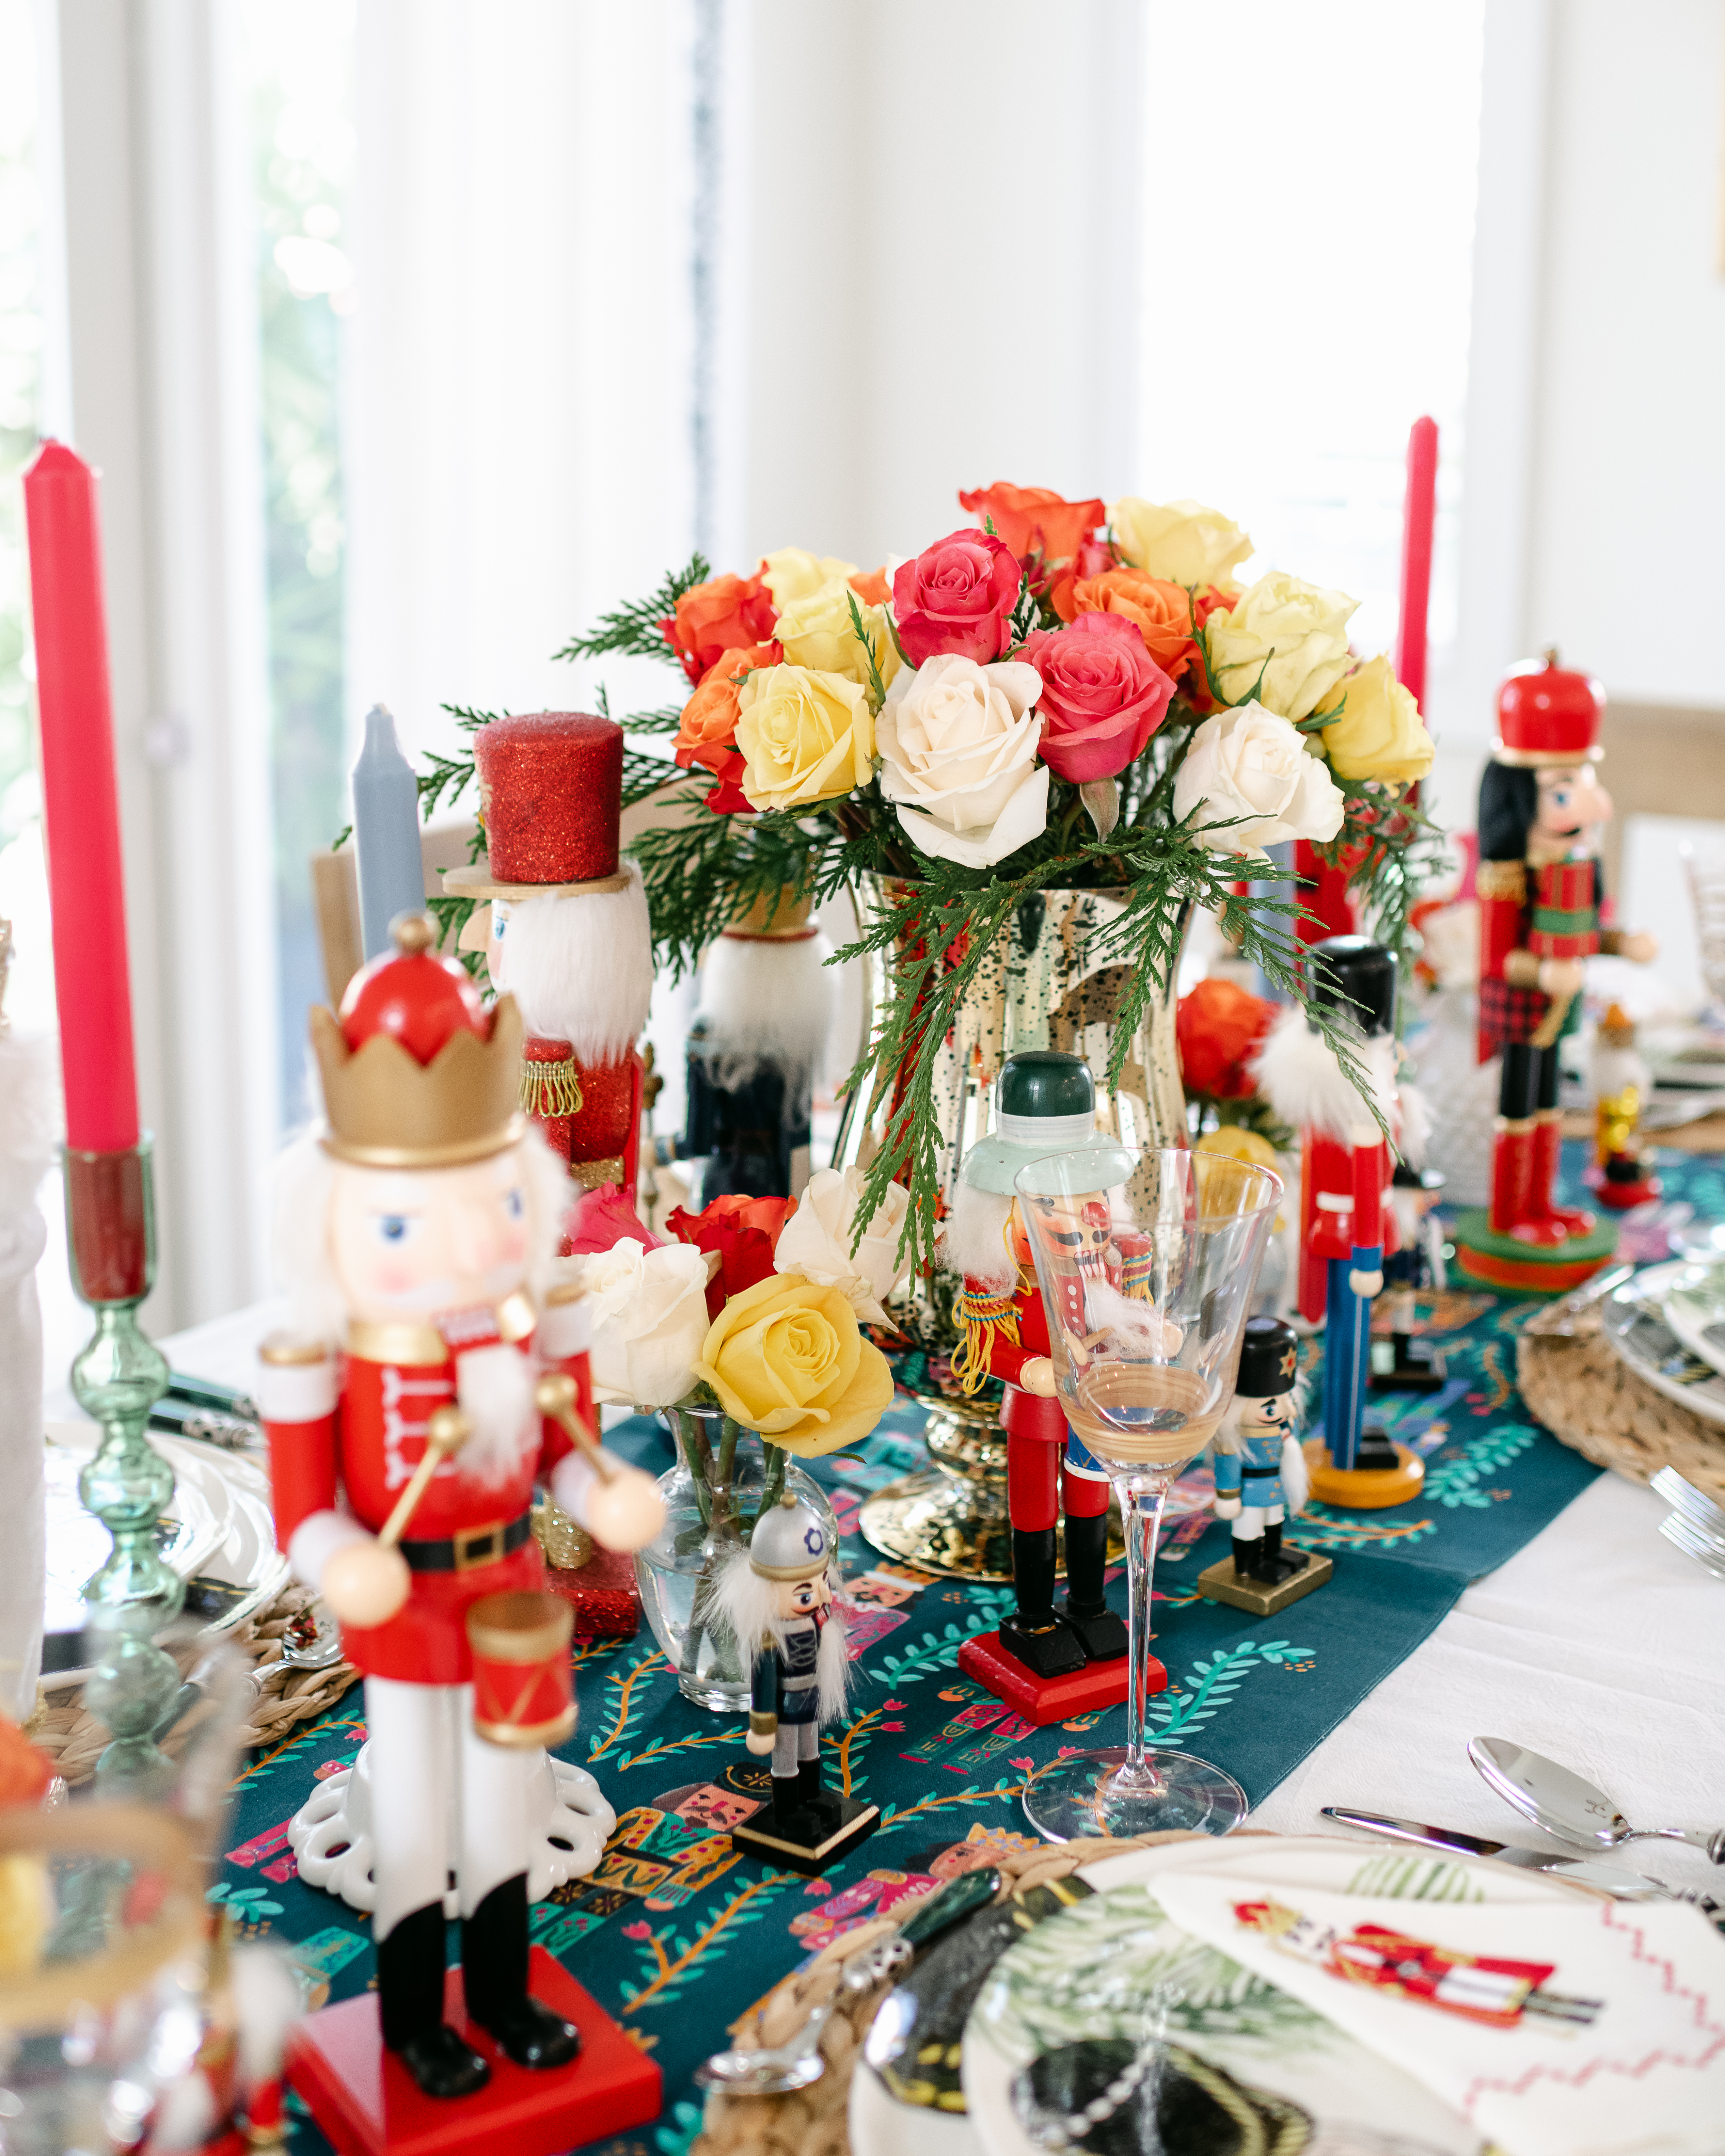 Colorful roses were the centerpiece